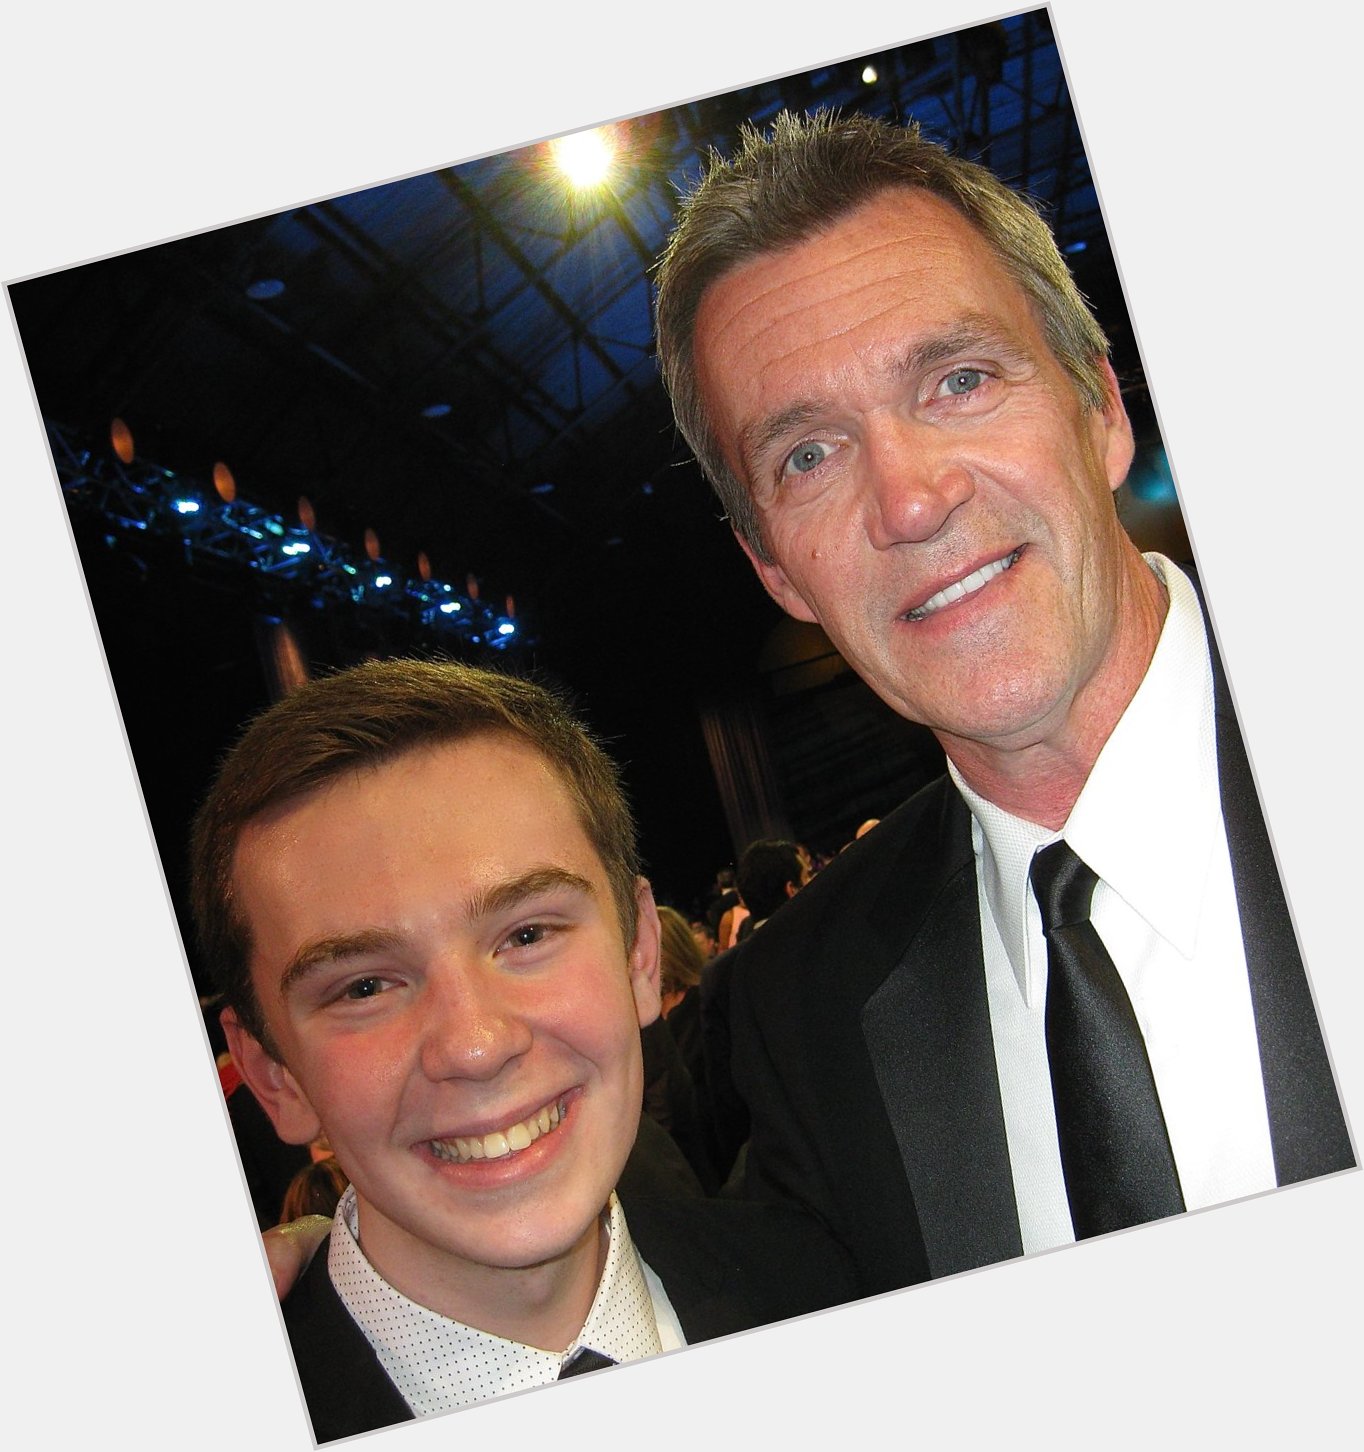 Happy Birthday to Neil Flynn - one of the nicest (and tallest) celebs I\ve had the chance to meet. 